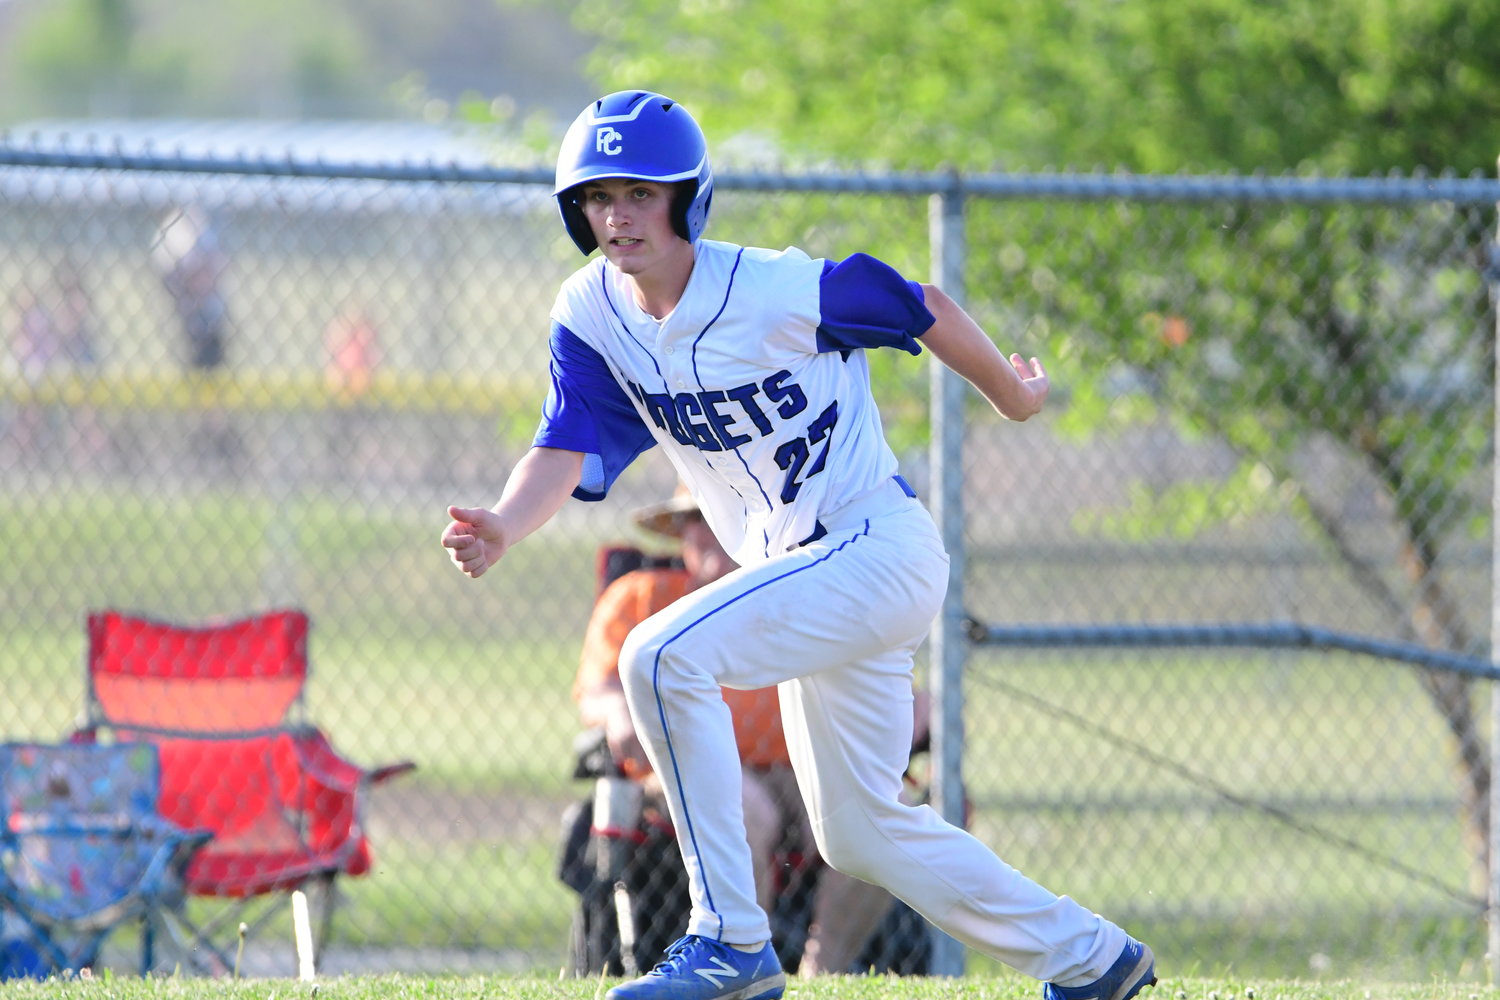 Putnam County's Brayden McReynolds takes a lead on third base during a game against Kirksville on May 11, 2022.